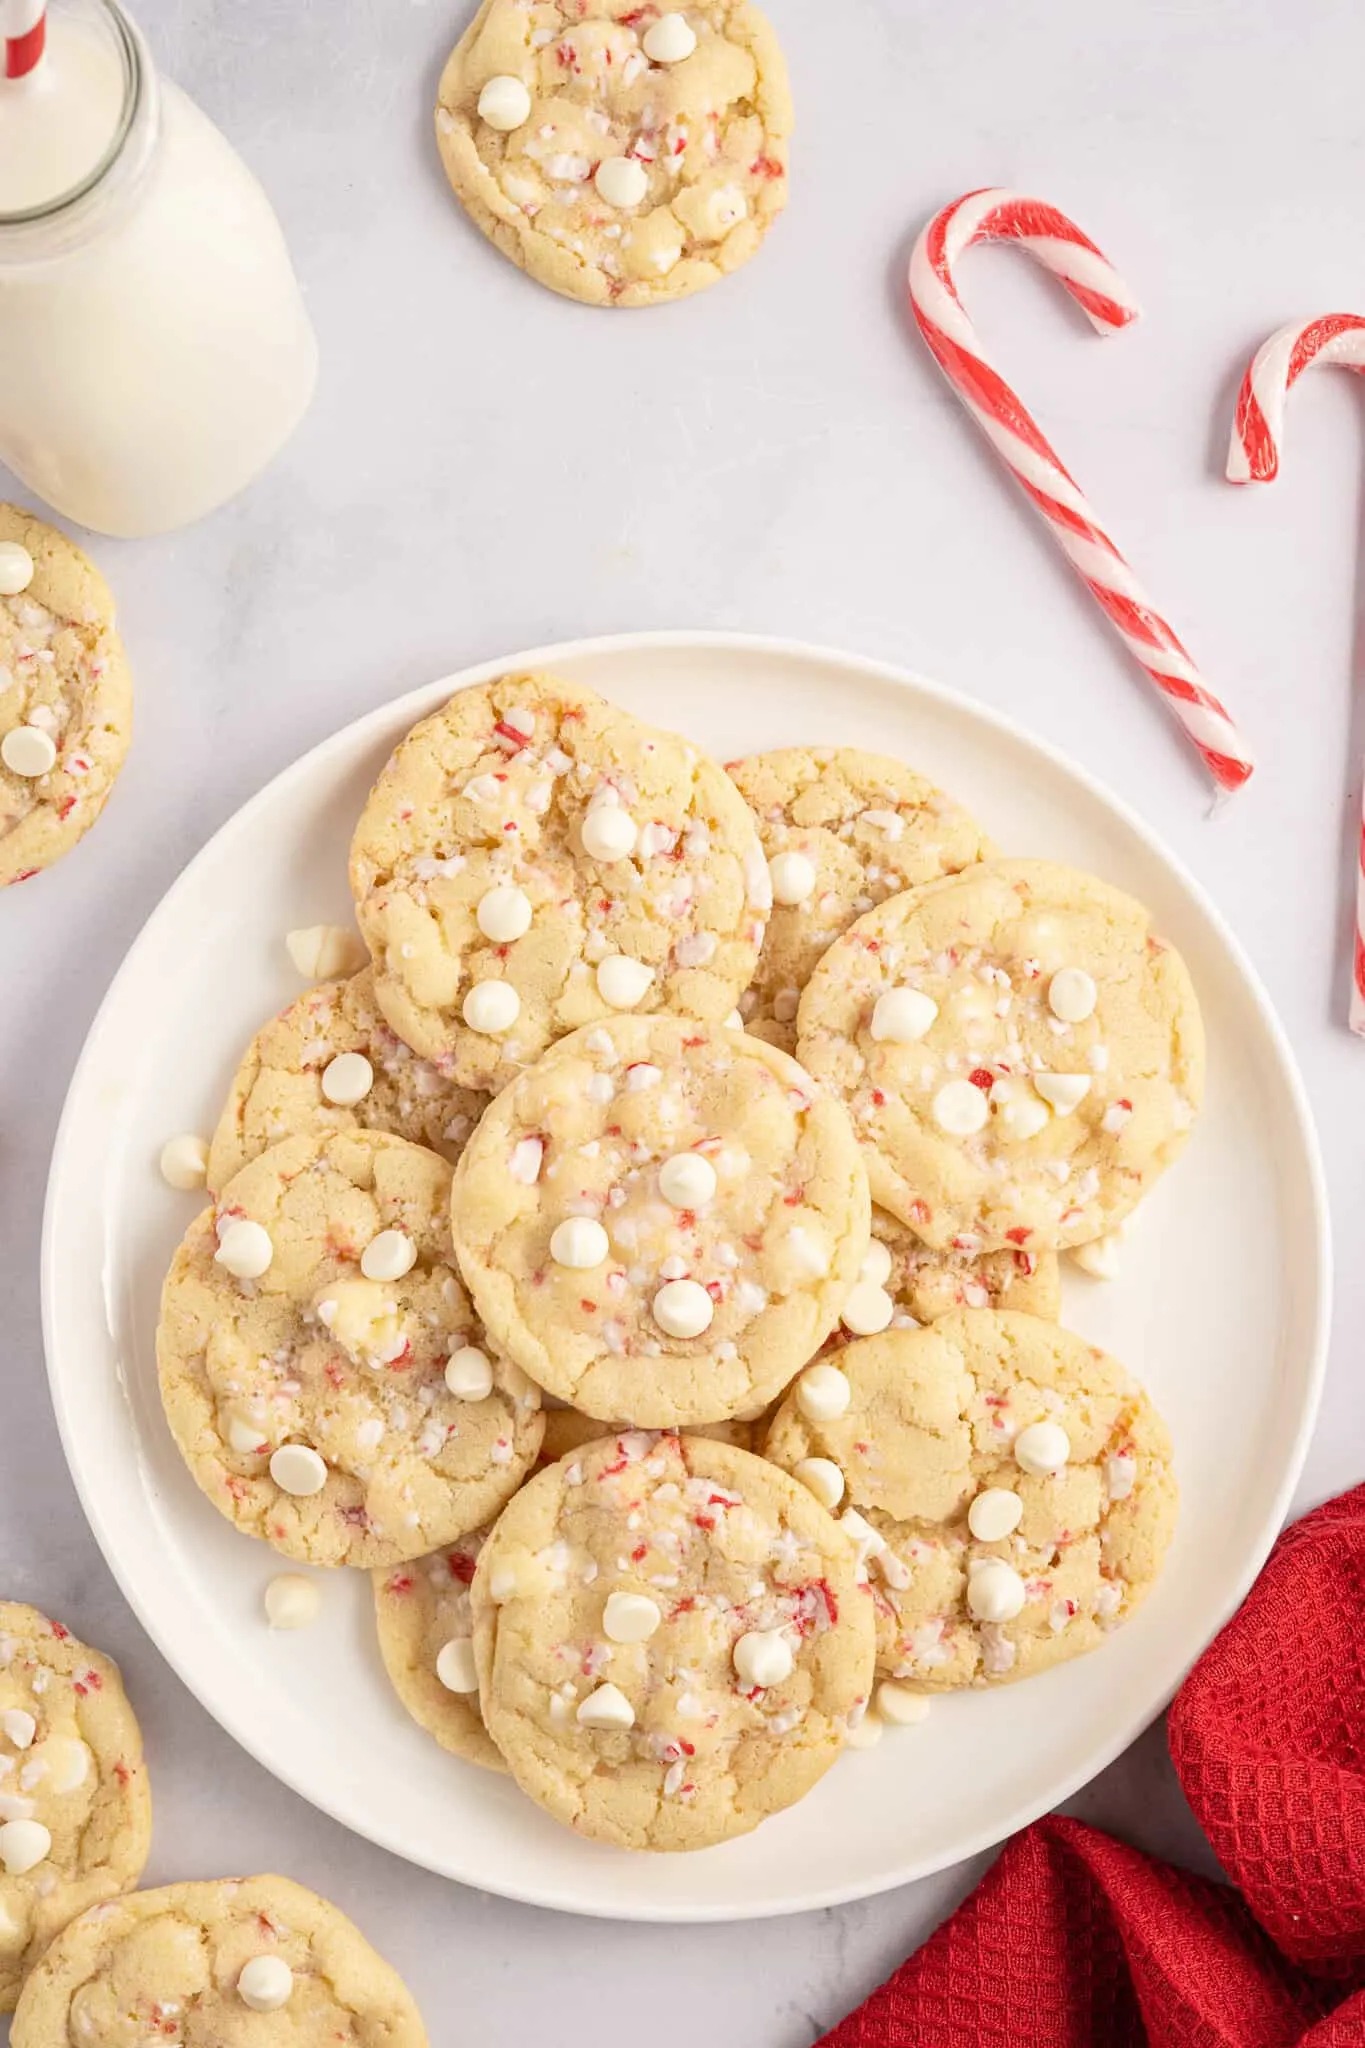 White Chocolate Peppermint Cookies are delicious chewy cookies loaded with white chocolate chips and candy cane pieces.